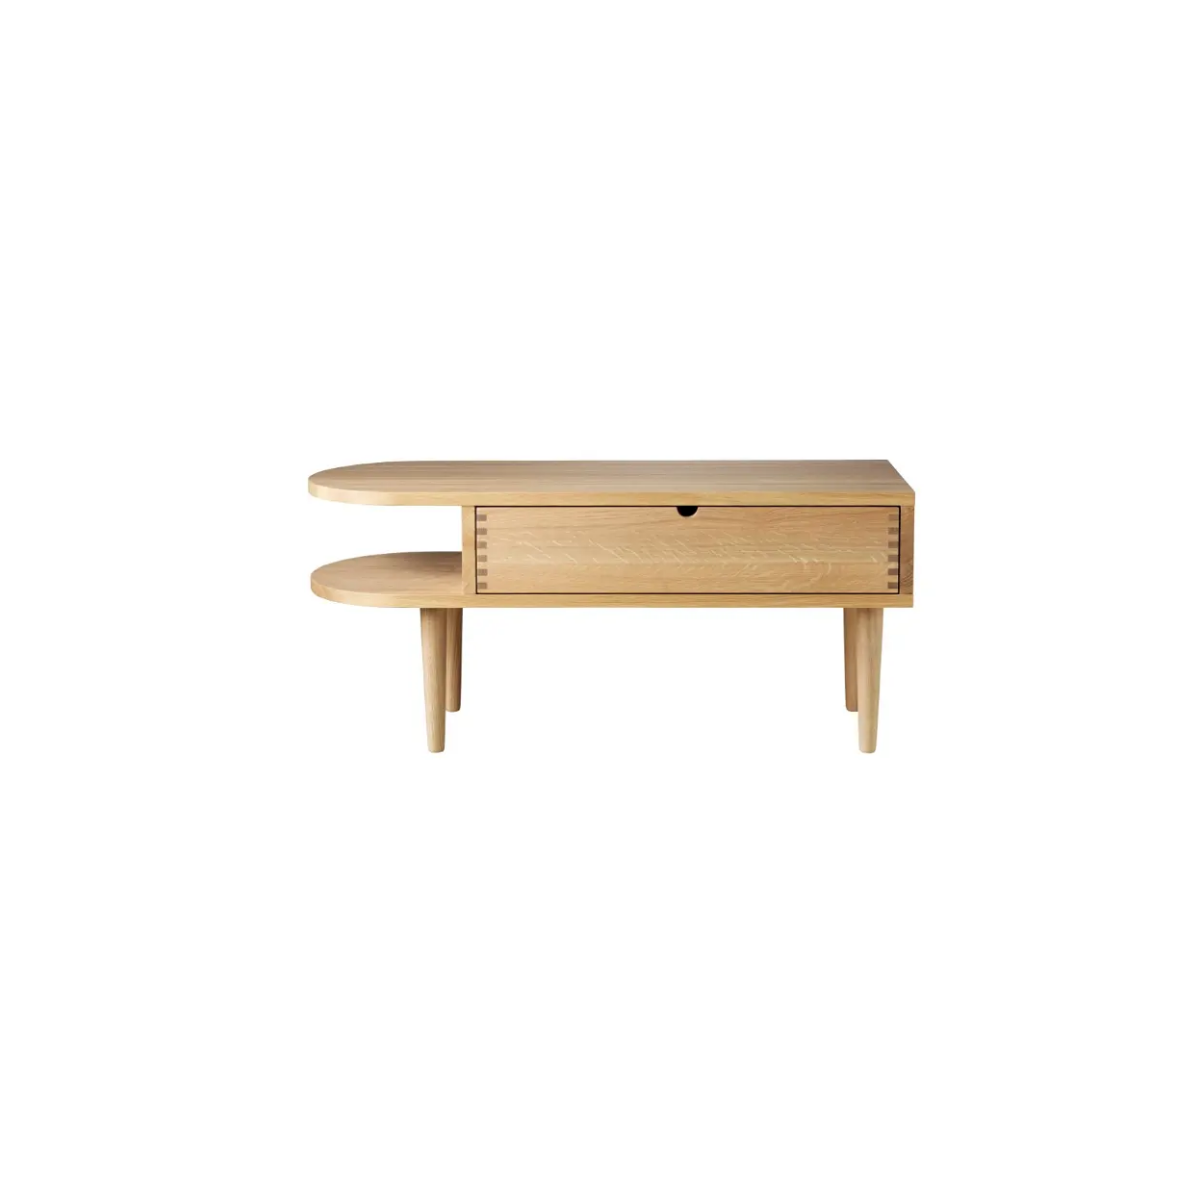 SOLD OUT oak - Radius bench - S